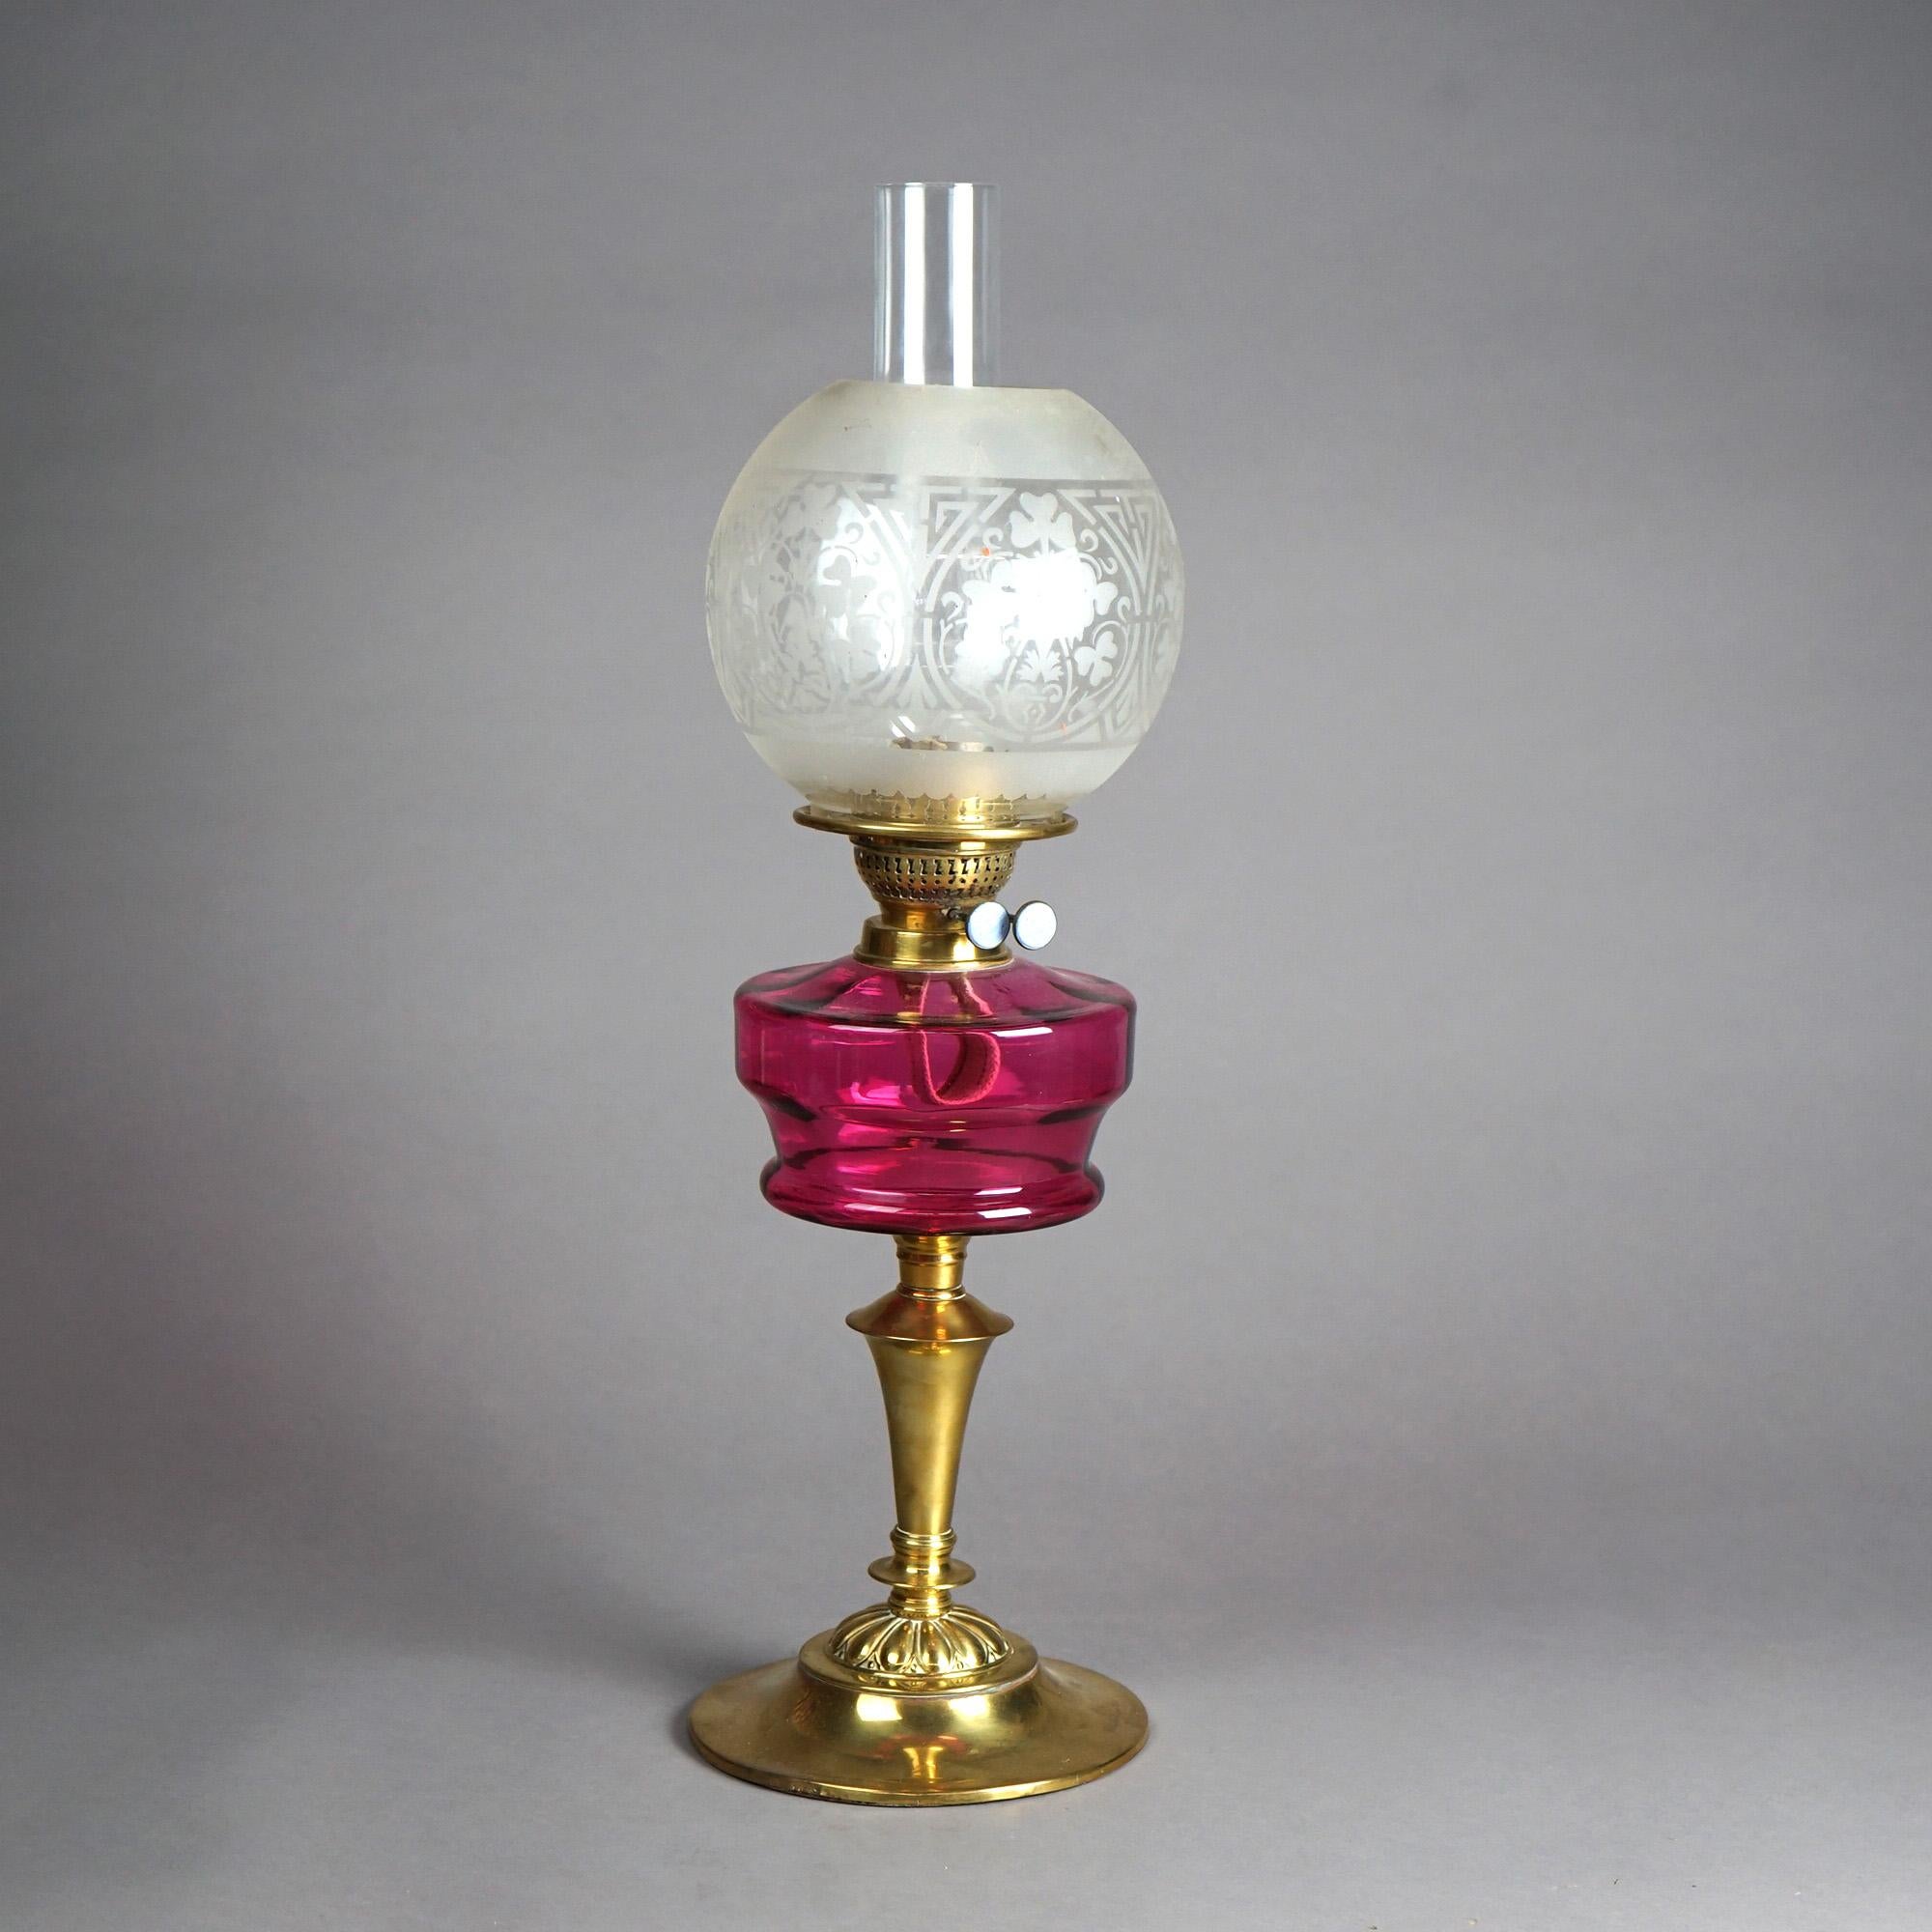 Antique Brass &Cranberry Glass “Gone With The Wind” Oil Lamp C1890 In Good Condition For Sale In Big Flats, NY